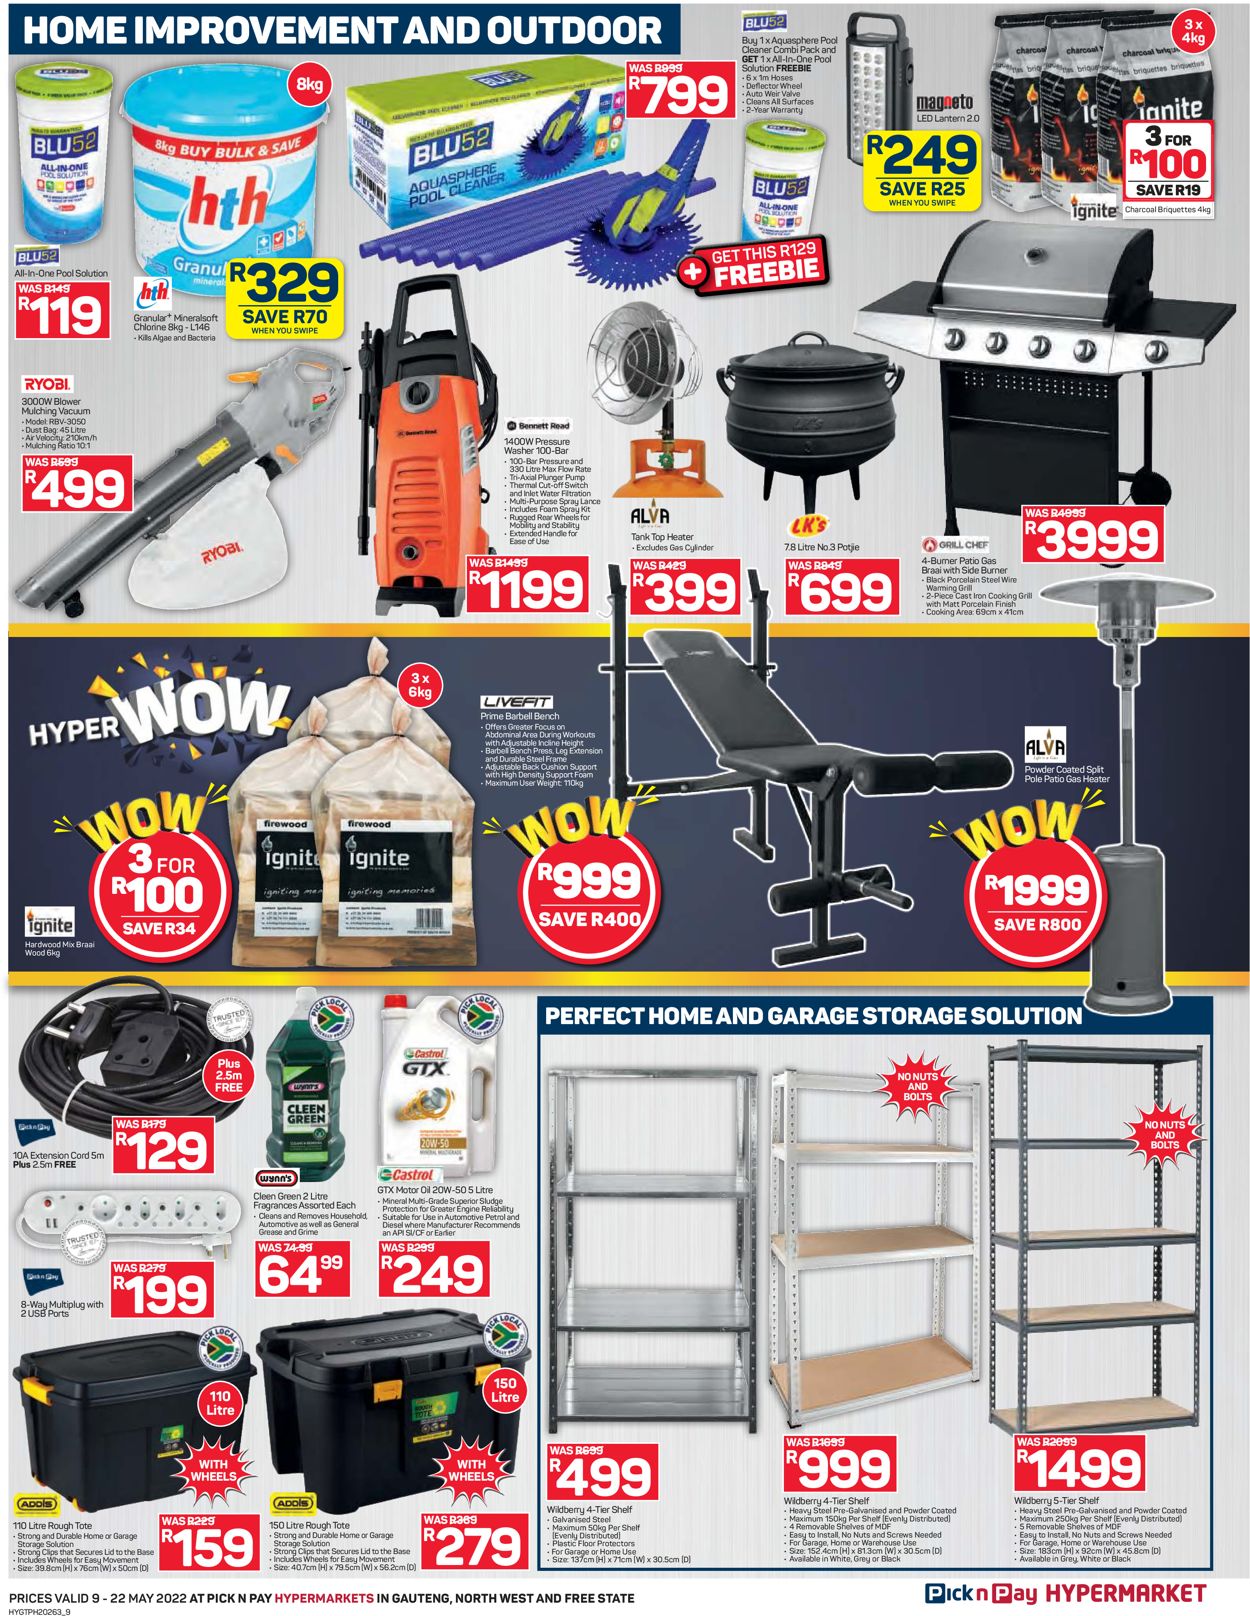 Pick n Pay Catalogue - 2022/05/09-2022/05/22 (Page 9)